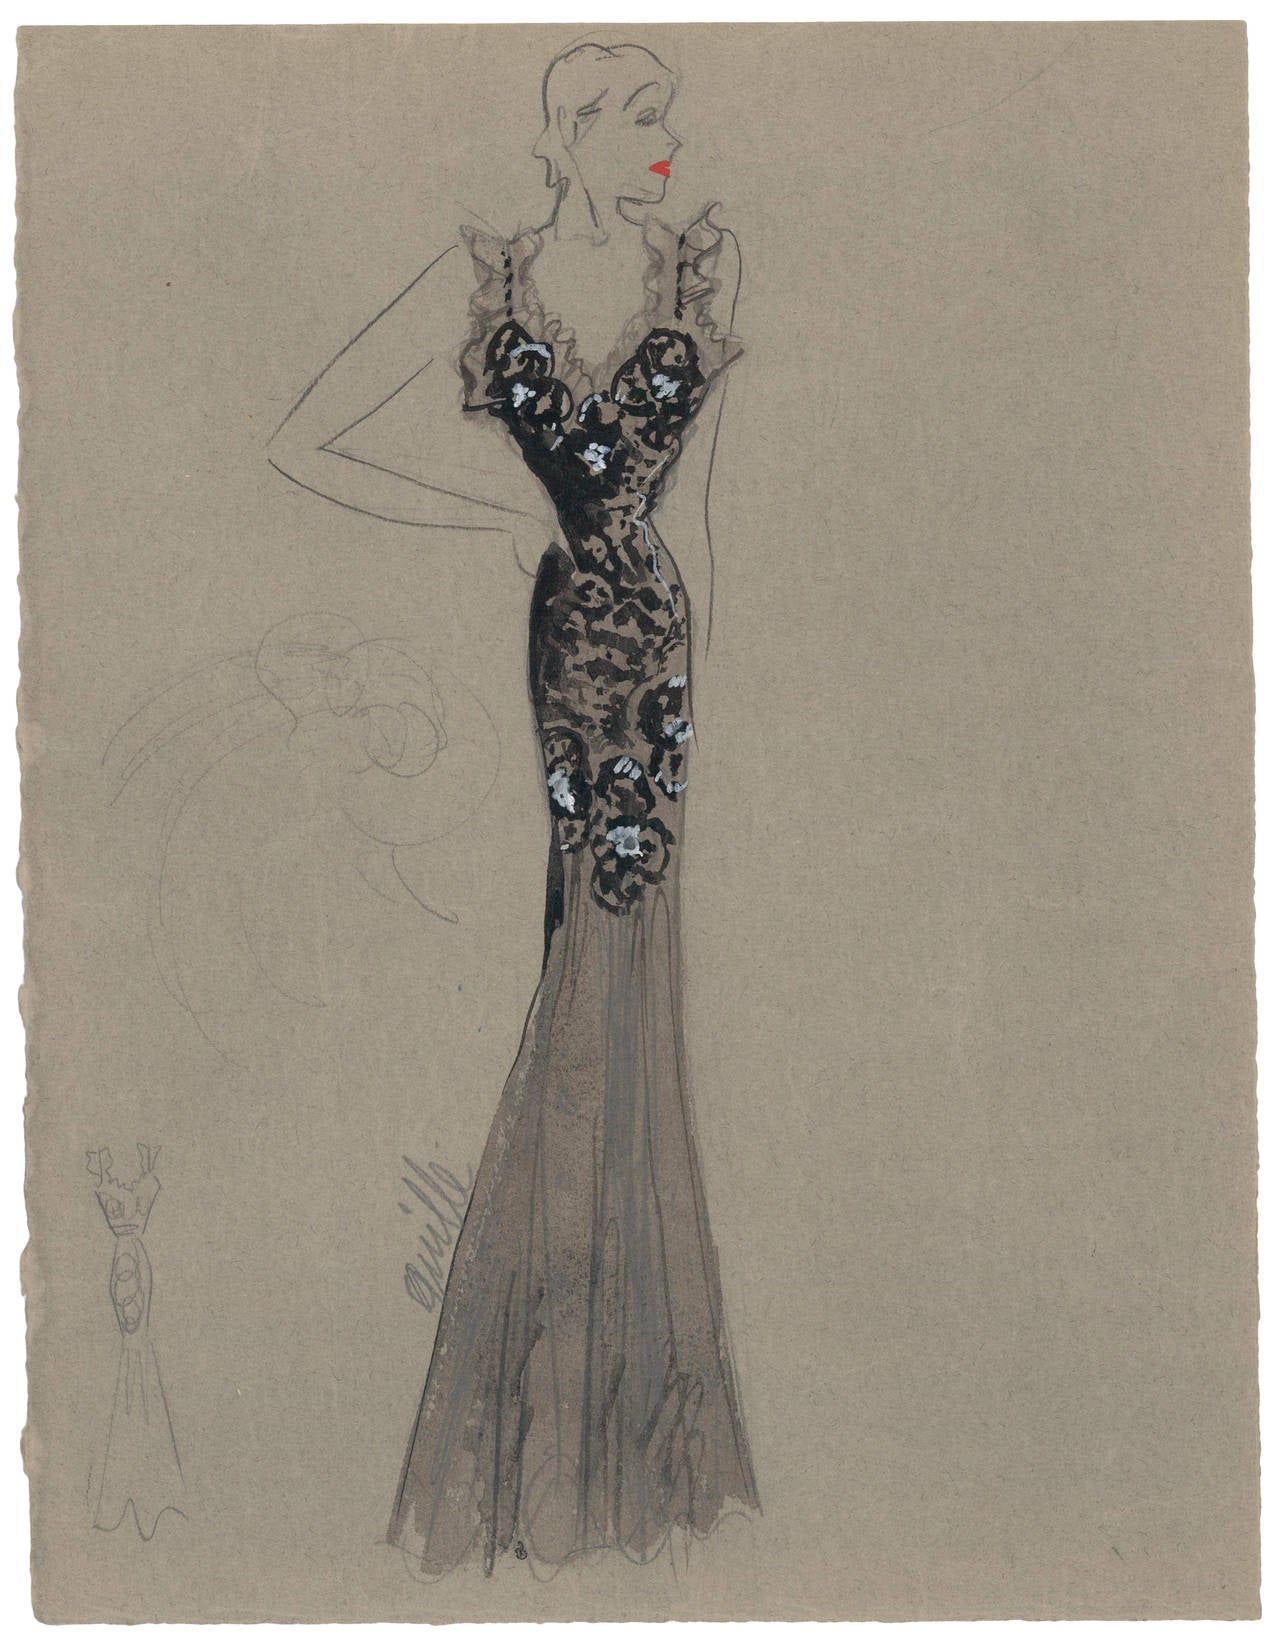 Four fashion illustrations by the French designer Charlotte Revyl. Formerly the director of House of Premet, in late 1930 Revyl opened her own Maison du Couture at 21, Rue du Faubourg Saint-Honoré in Paris. The drawings are done in graphite and